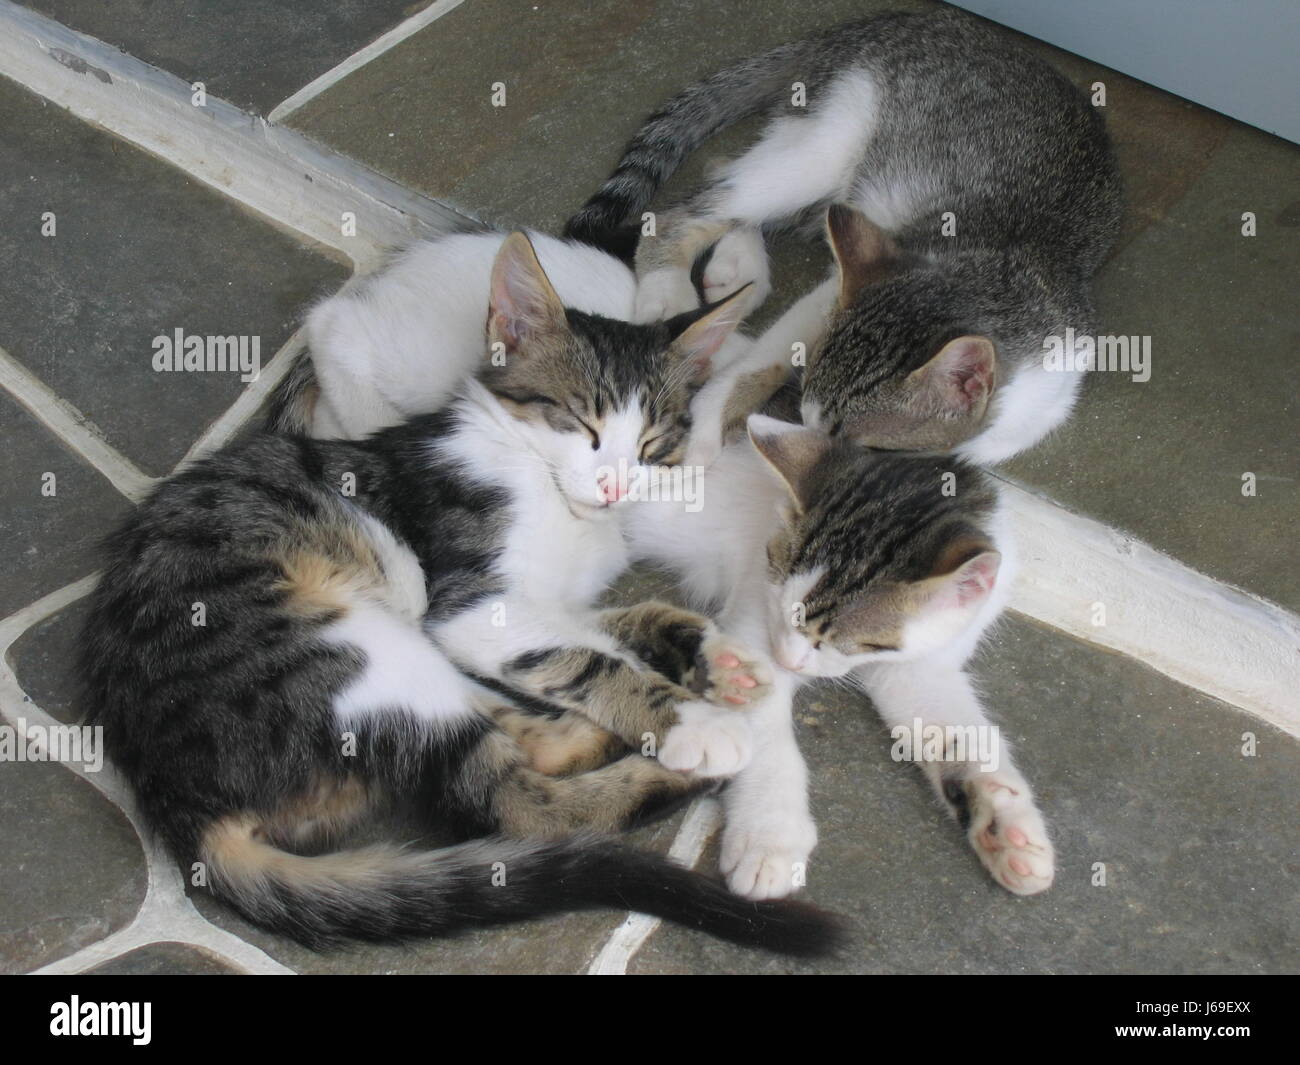 cats sleep sleeping cuddle tins doze facilitate ease resting relax recover Stock Photo